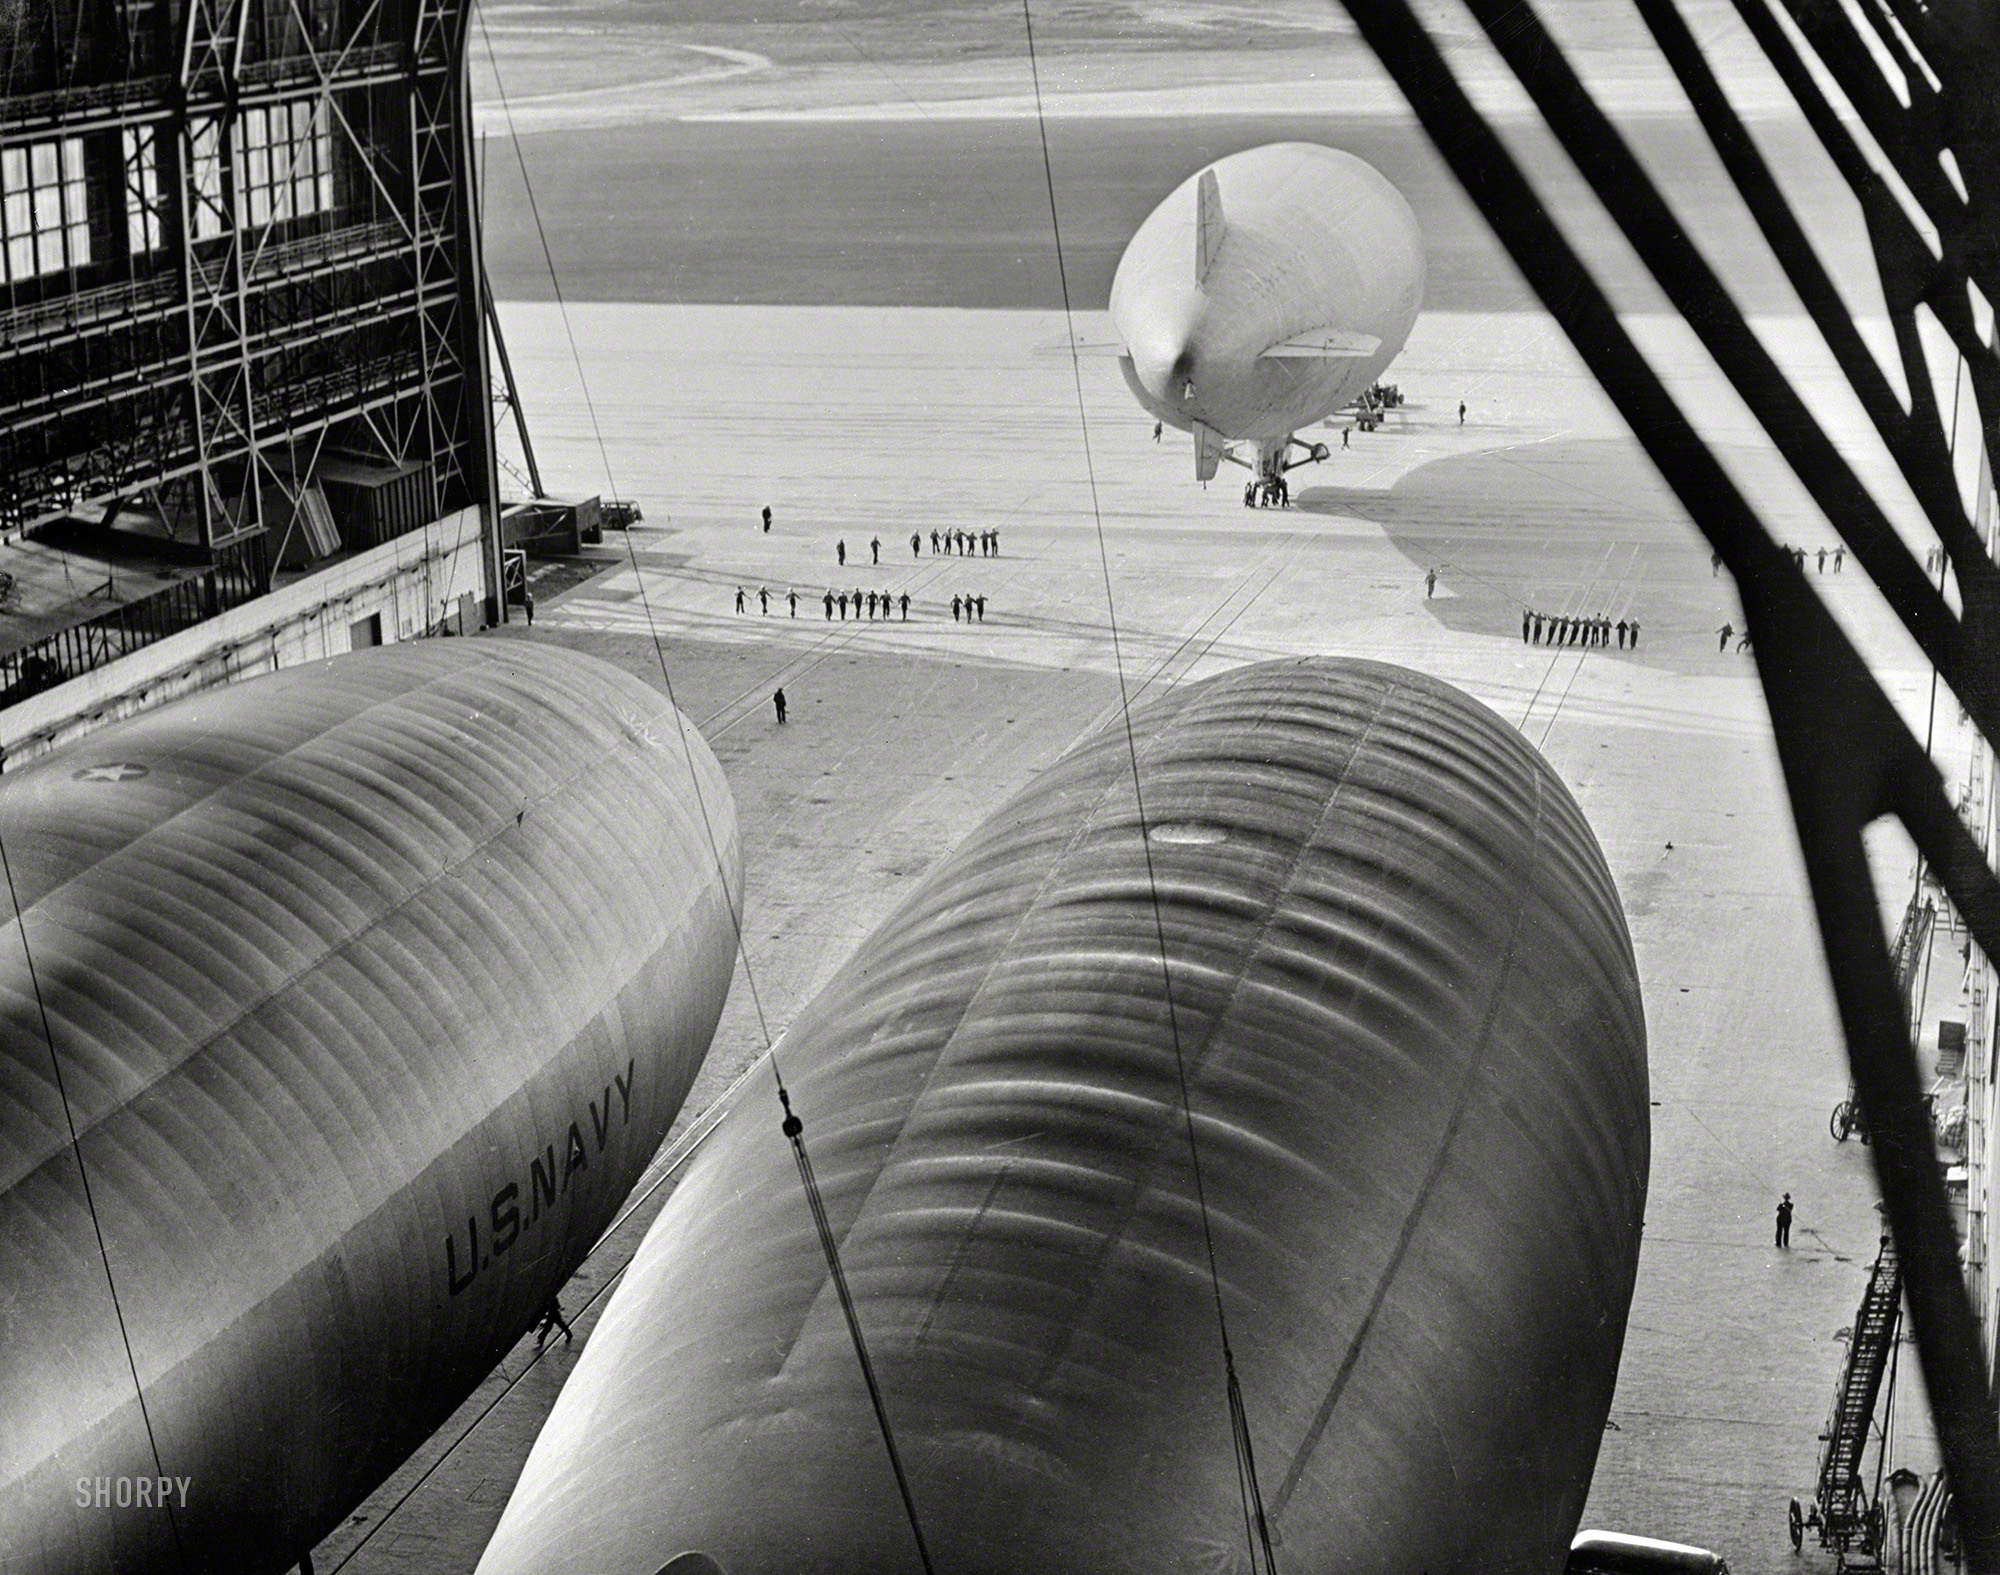 January 1943. "A blimp of the U.S. Navy is led onto the apron of an East Coast lighter-than-air station before taking off on a patrol flight over the Atlantic Ocean." 4x5 nitrate negative, Office of War Information. View full size.